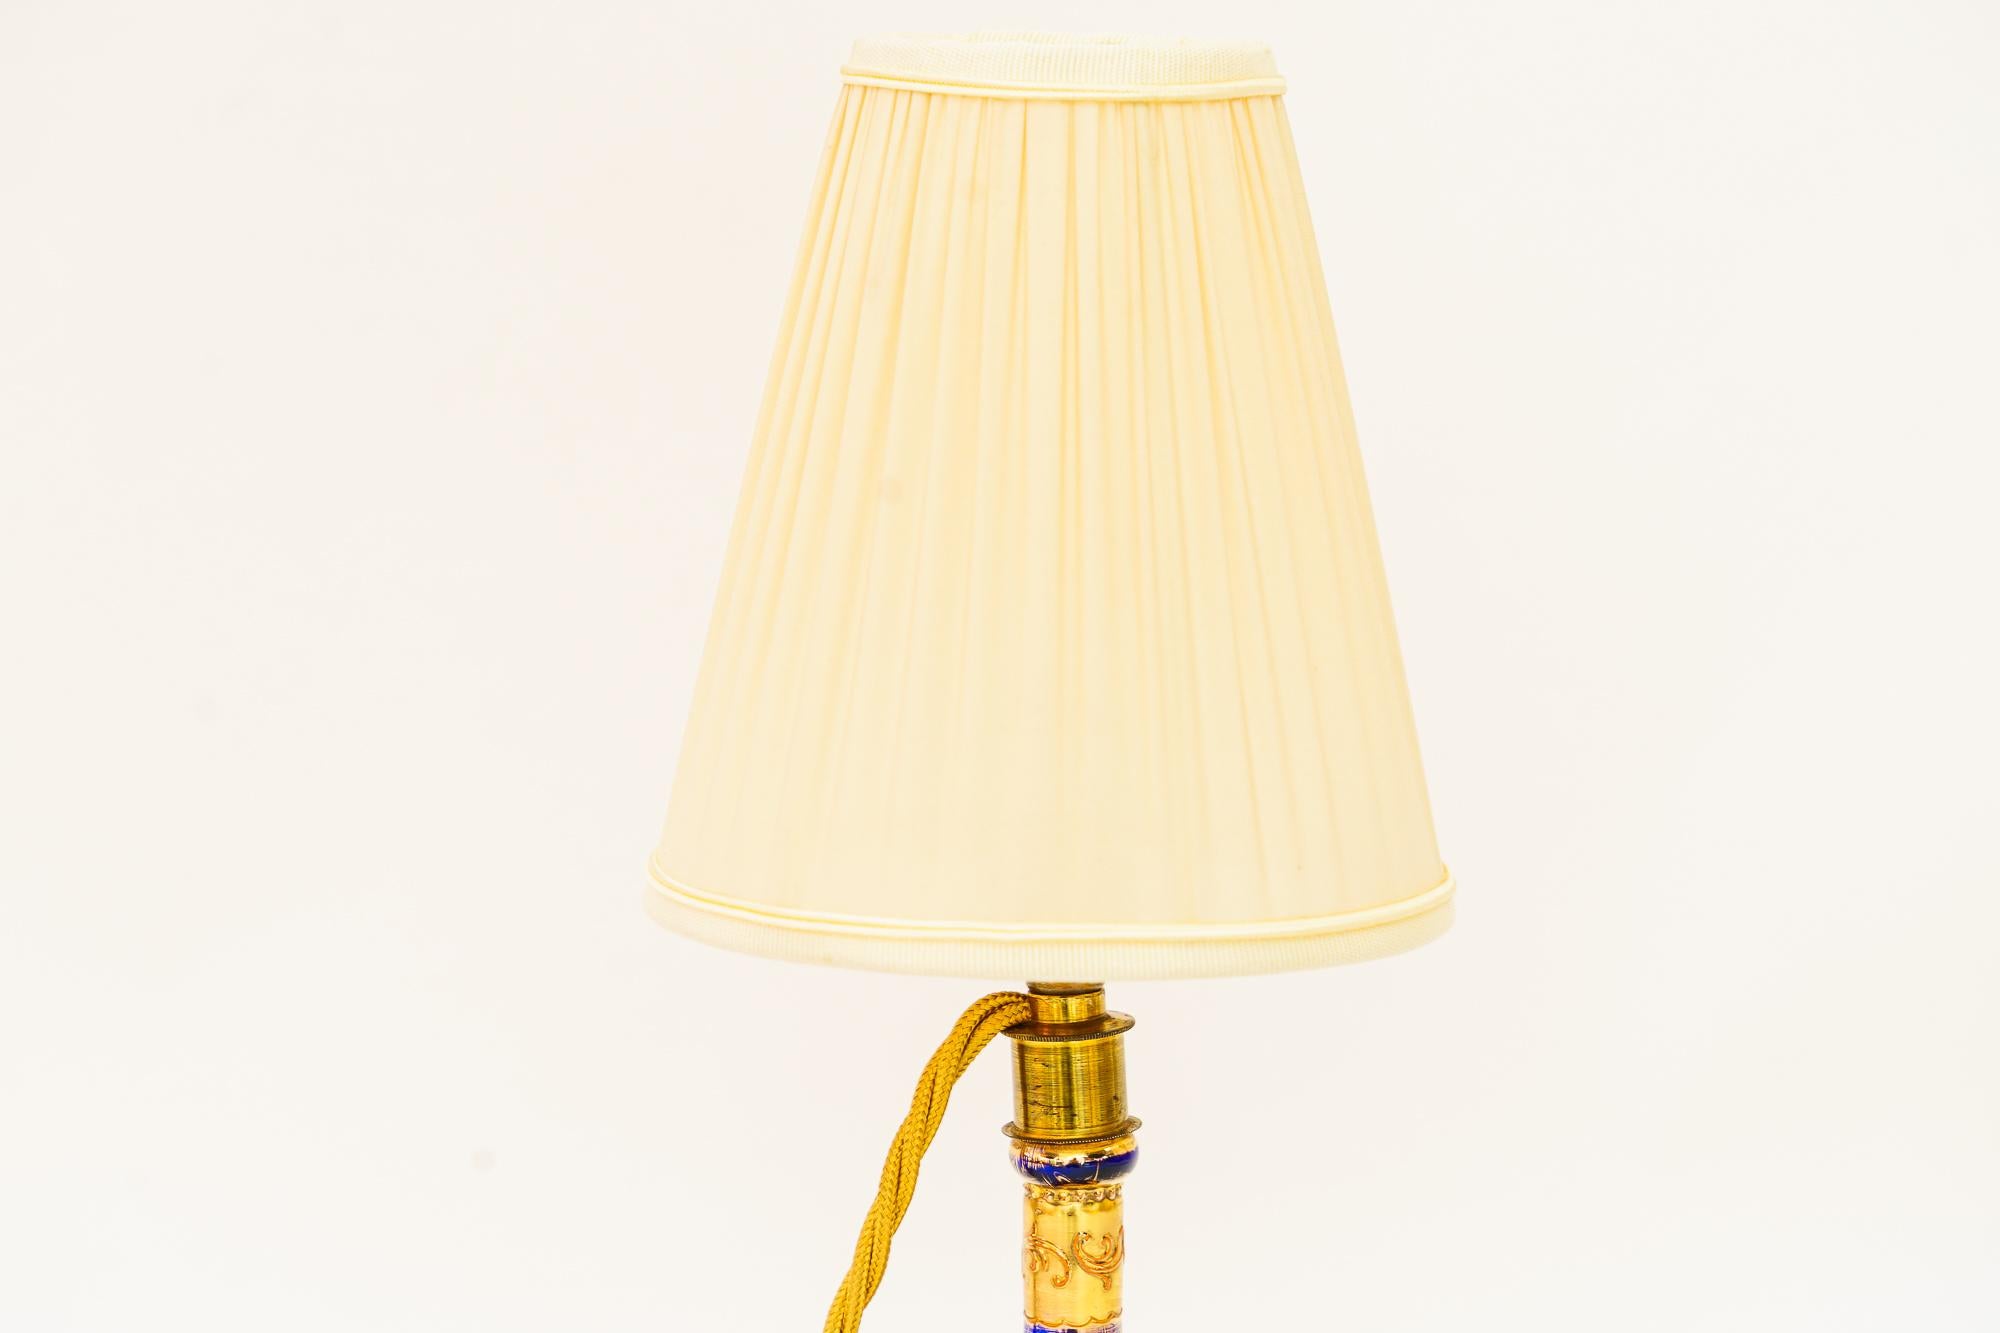 Art Deco painted glass table lamp with fabric shade vienna around 1920s
Original condition
The fabric shade is replaced ( new )